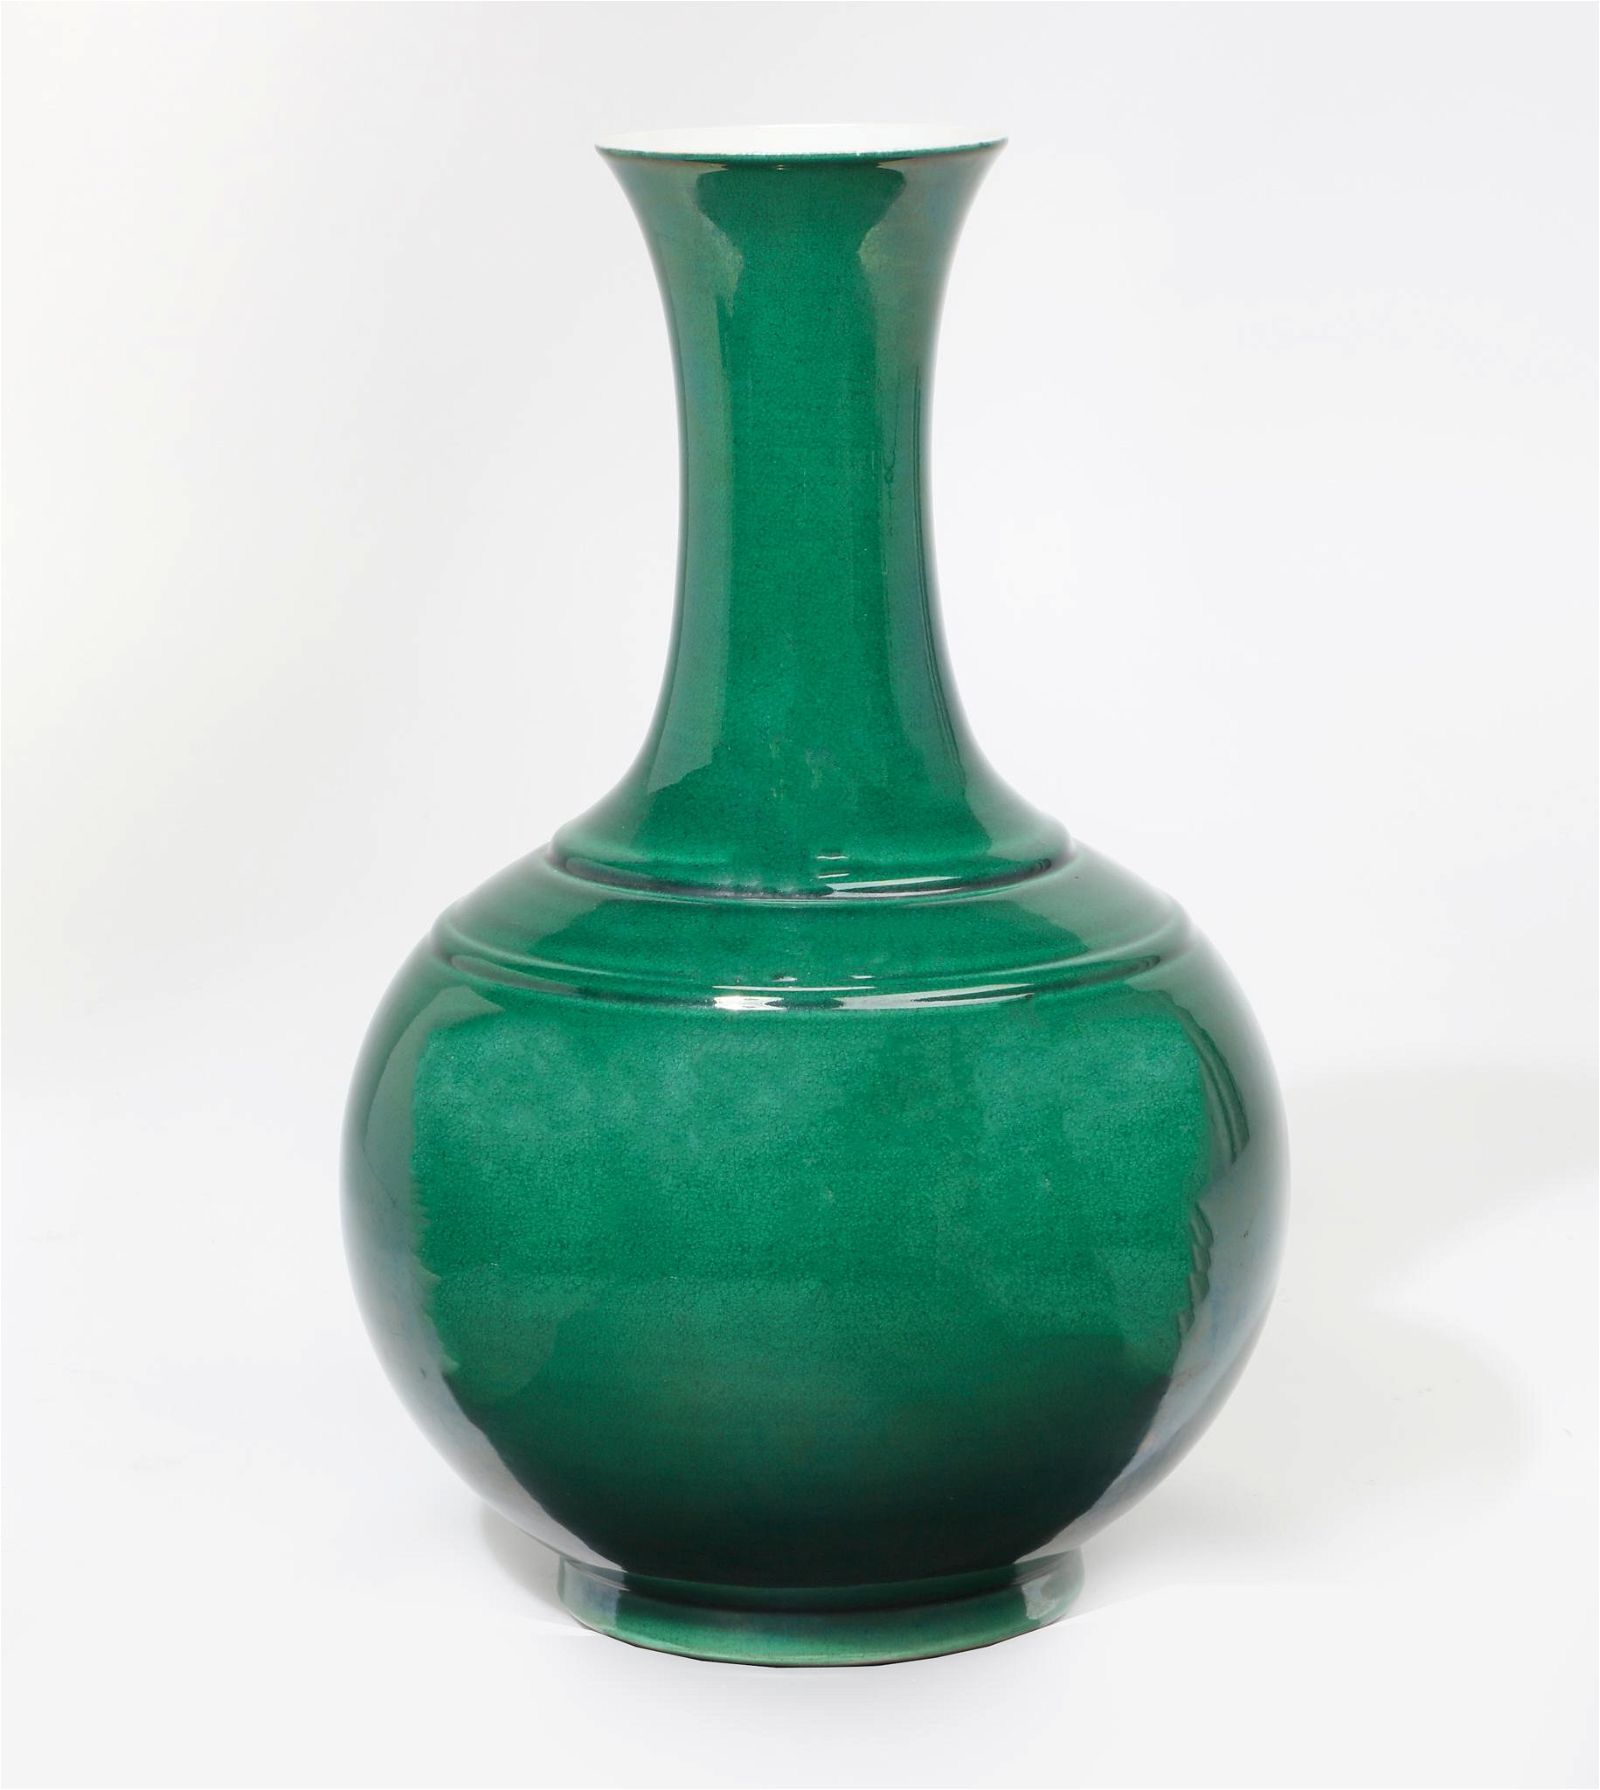 A CHINESE PORCELAIN GREEN VASEA